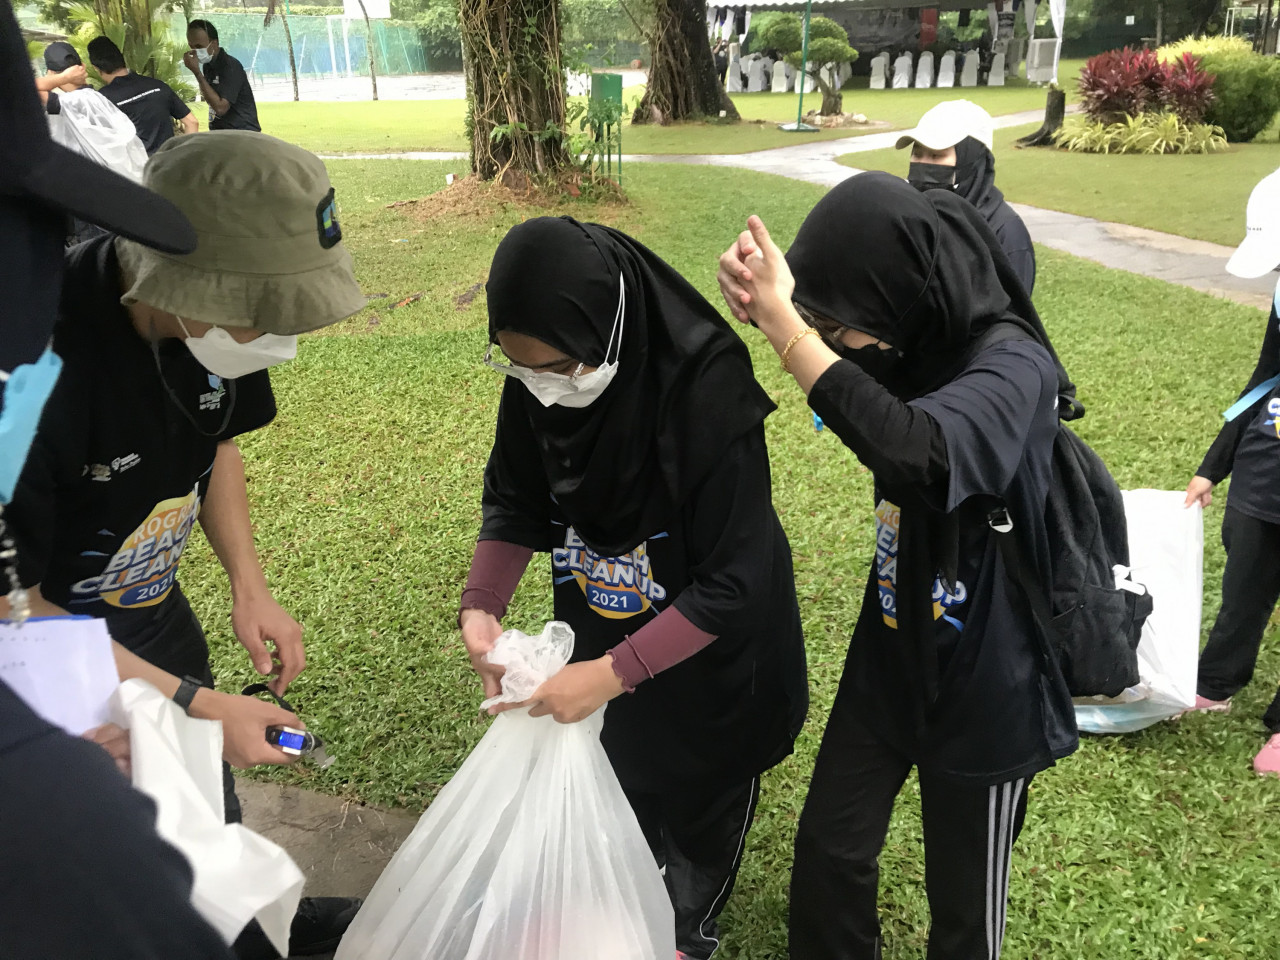 The joint programme organised by Rakan Alam Sekitar, a division of the Environment Department, and Tenaga Nasional Bhd saw 137kg of waste collected within an hour and a half. – RACHEL YEOH/The Vibes pic, December 18, 2021